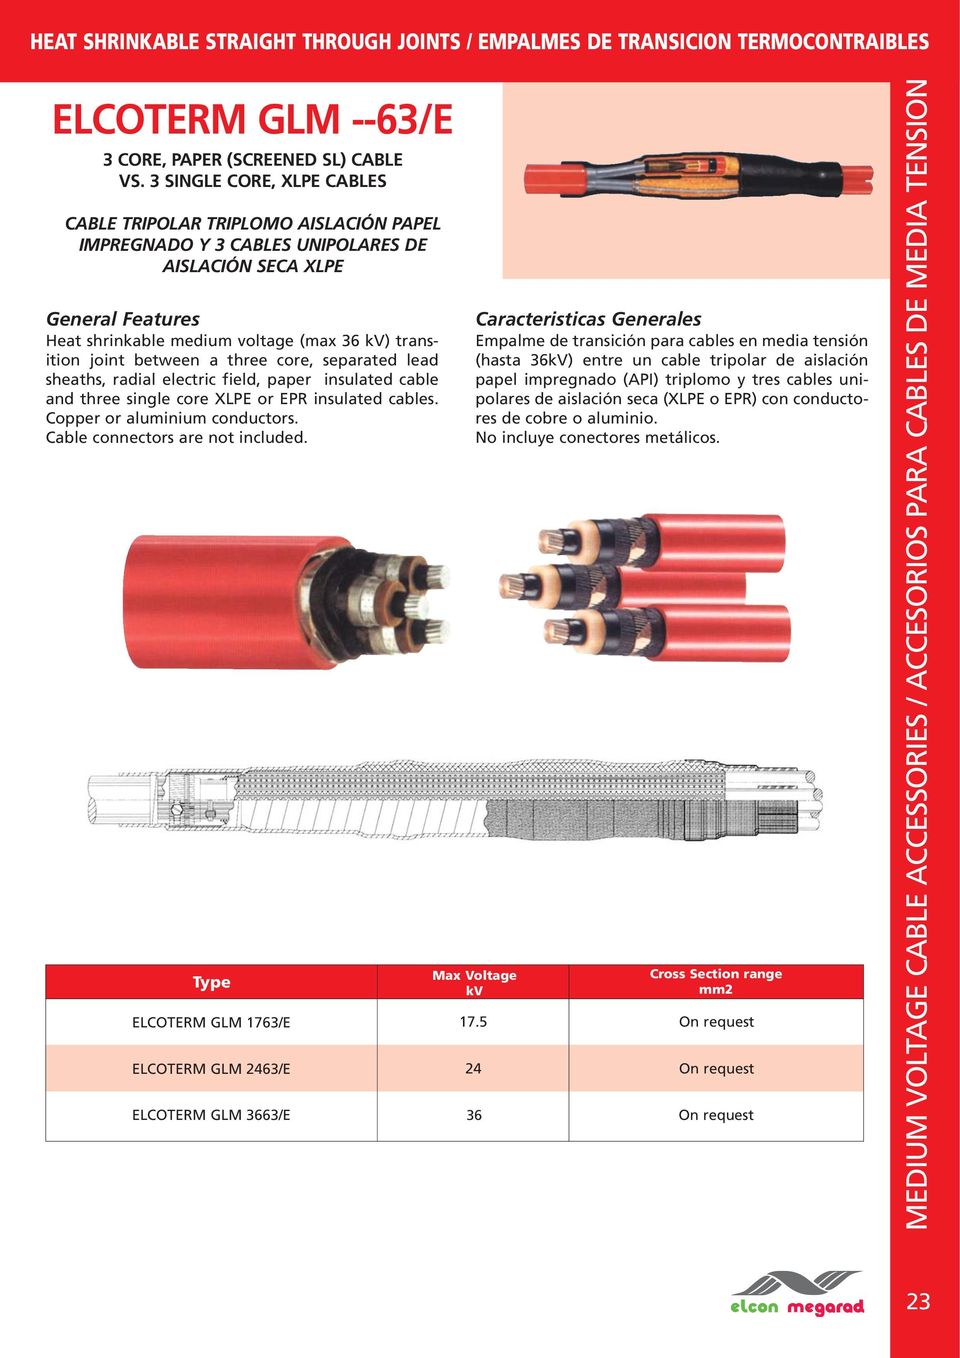 separated lead sheaths, radial electric field, paper insulated cable and three single core XLPE or EPR insulated cables. Copper or aluminium conductors. Cable connectors are not included.